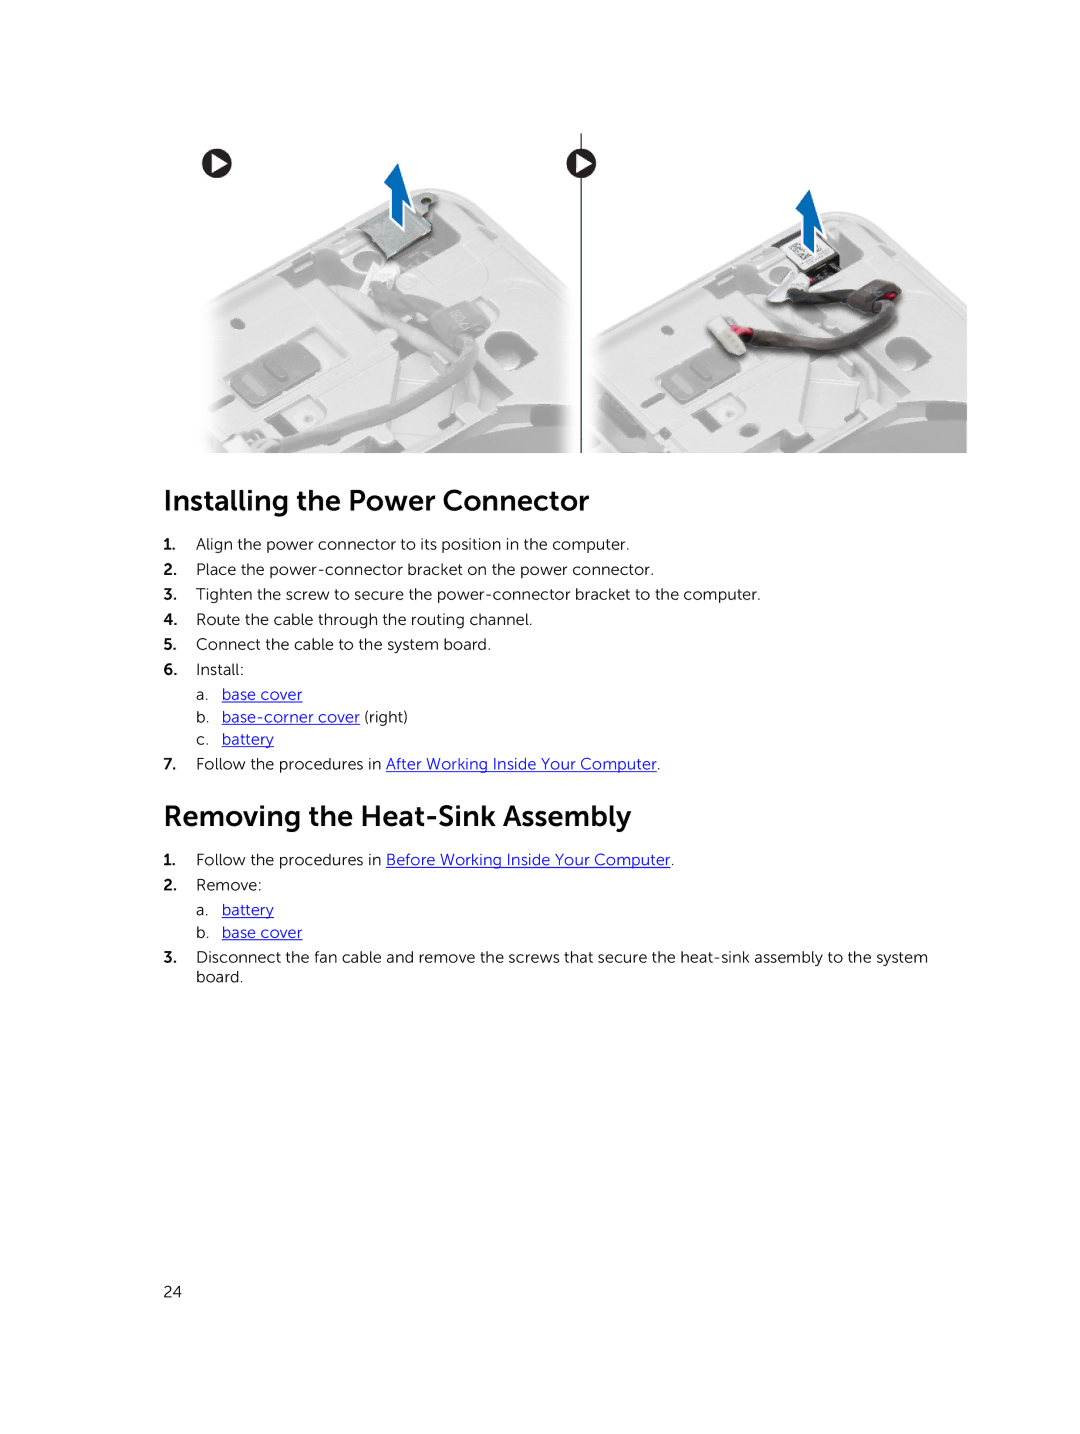 Dell M2800 owner manual Installing the Power Connector, Removing the Heat-Sink Assembly 